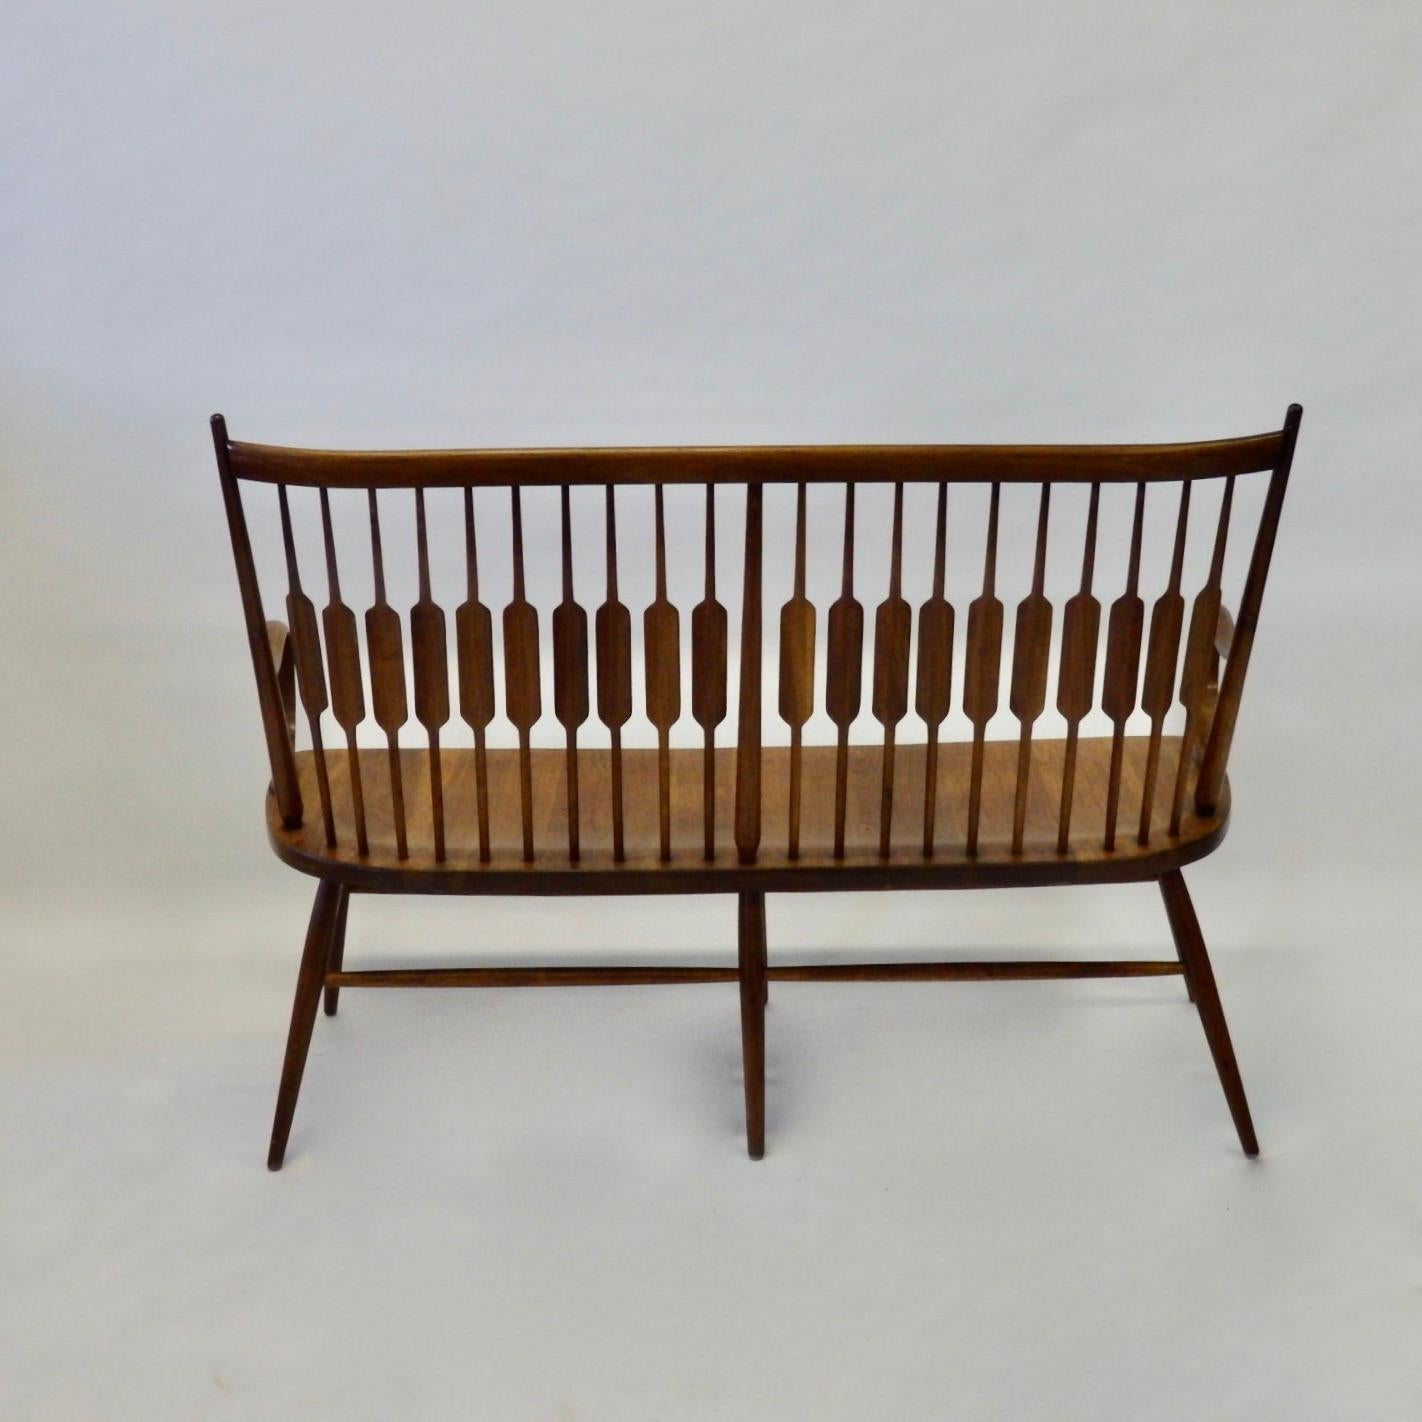 20th Century Kipp Stewart for Drexel Modernist Slat Back Bench or Settee with Steam Bent Arms